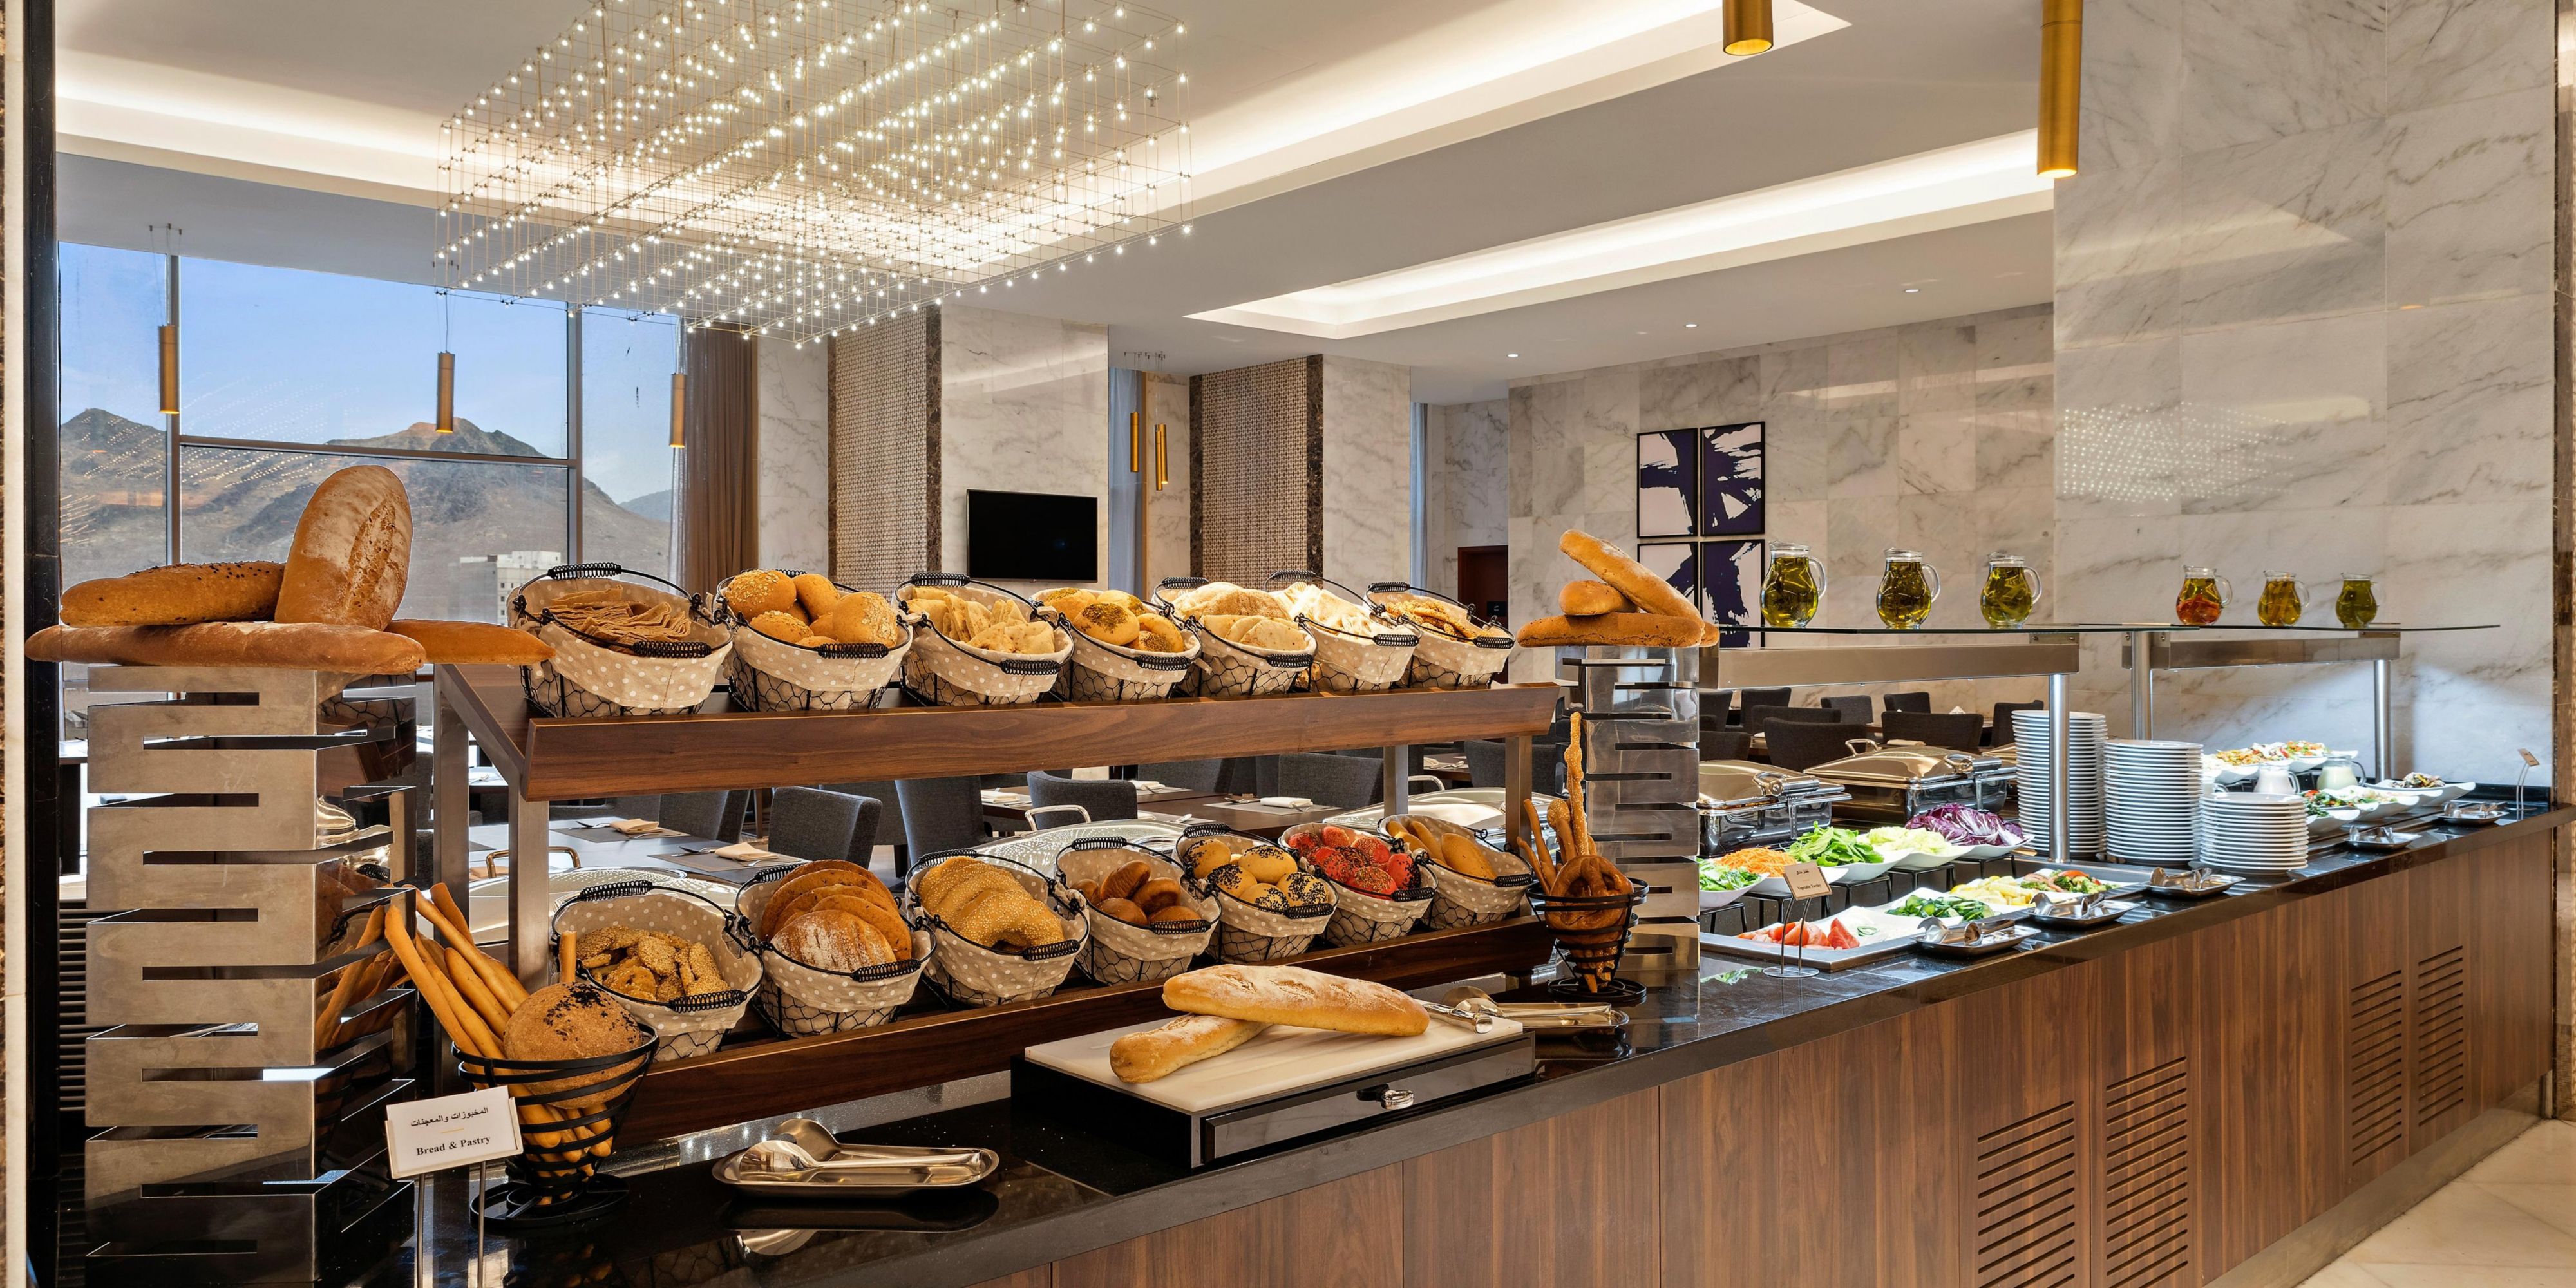 At voco Makkah, we've got your breakfast covered. Enjoy daily buffets served in all three restaurants: Al Karam, Telal and Bakkah. With healthy fruit, cereals, savoury local dishes, and international options, you're sure to find something you'll love.